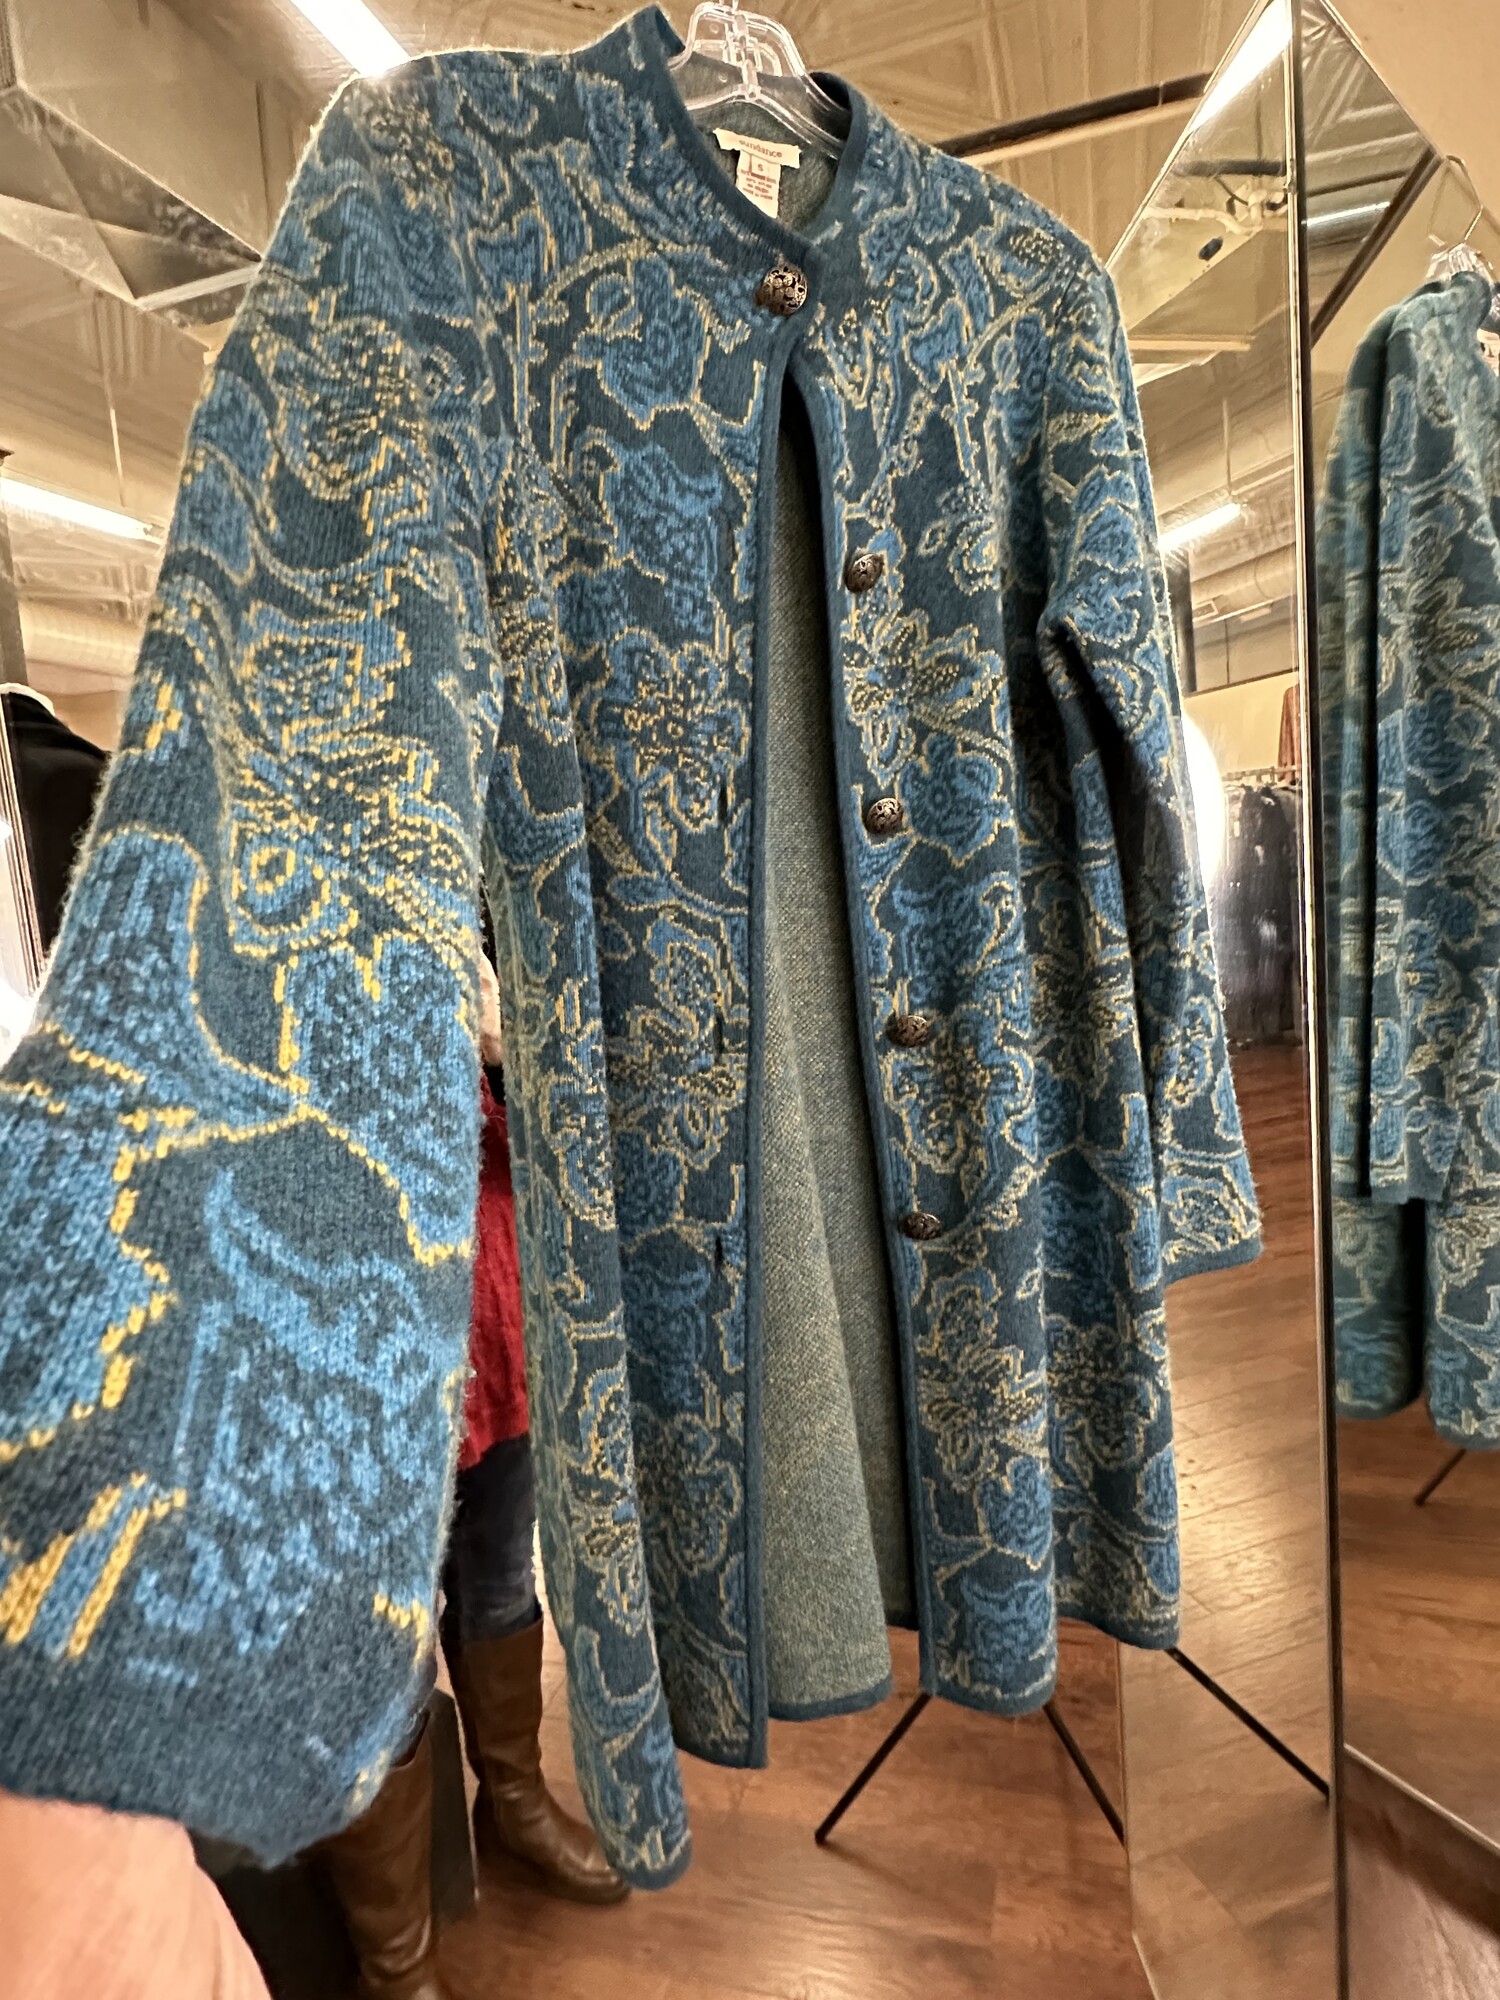 Sundance Long Cardigan, Teal, Floral pattern. Beautiful color and buttons. Dry Clean.